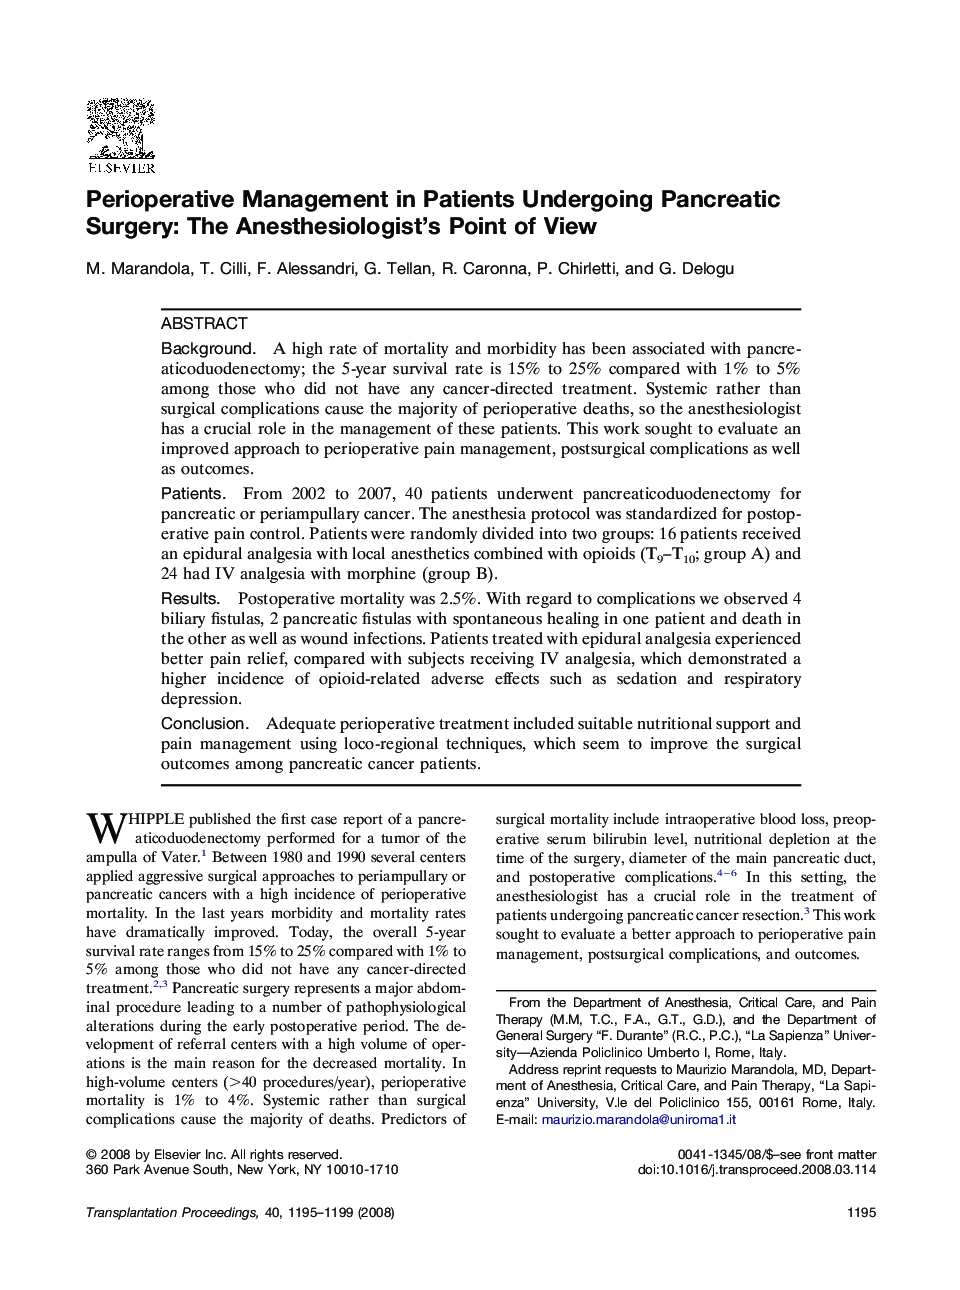 Perioperative Management in Patients Undergoing Pancreatic Surgery: The Anesthesiologist's Point of View